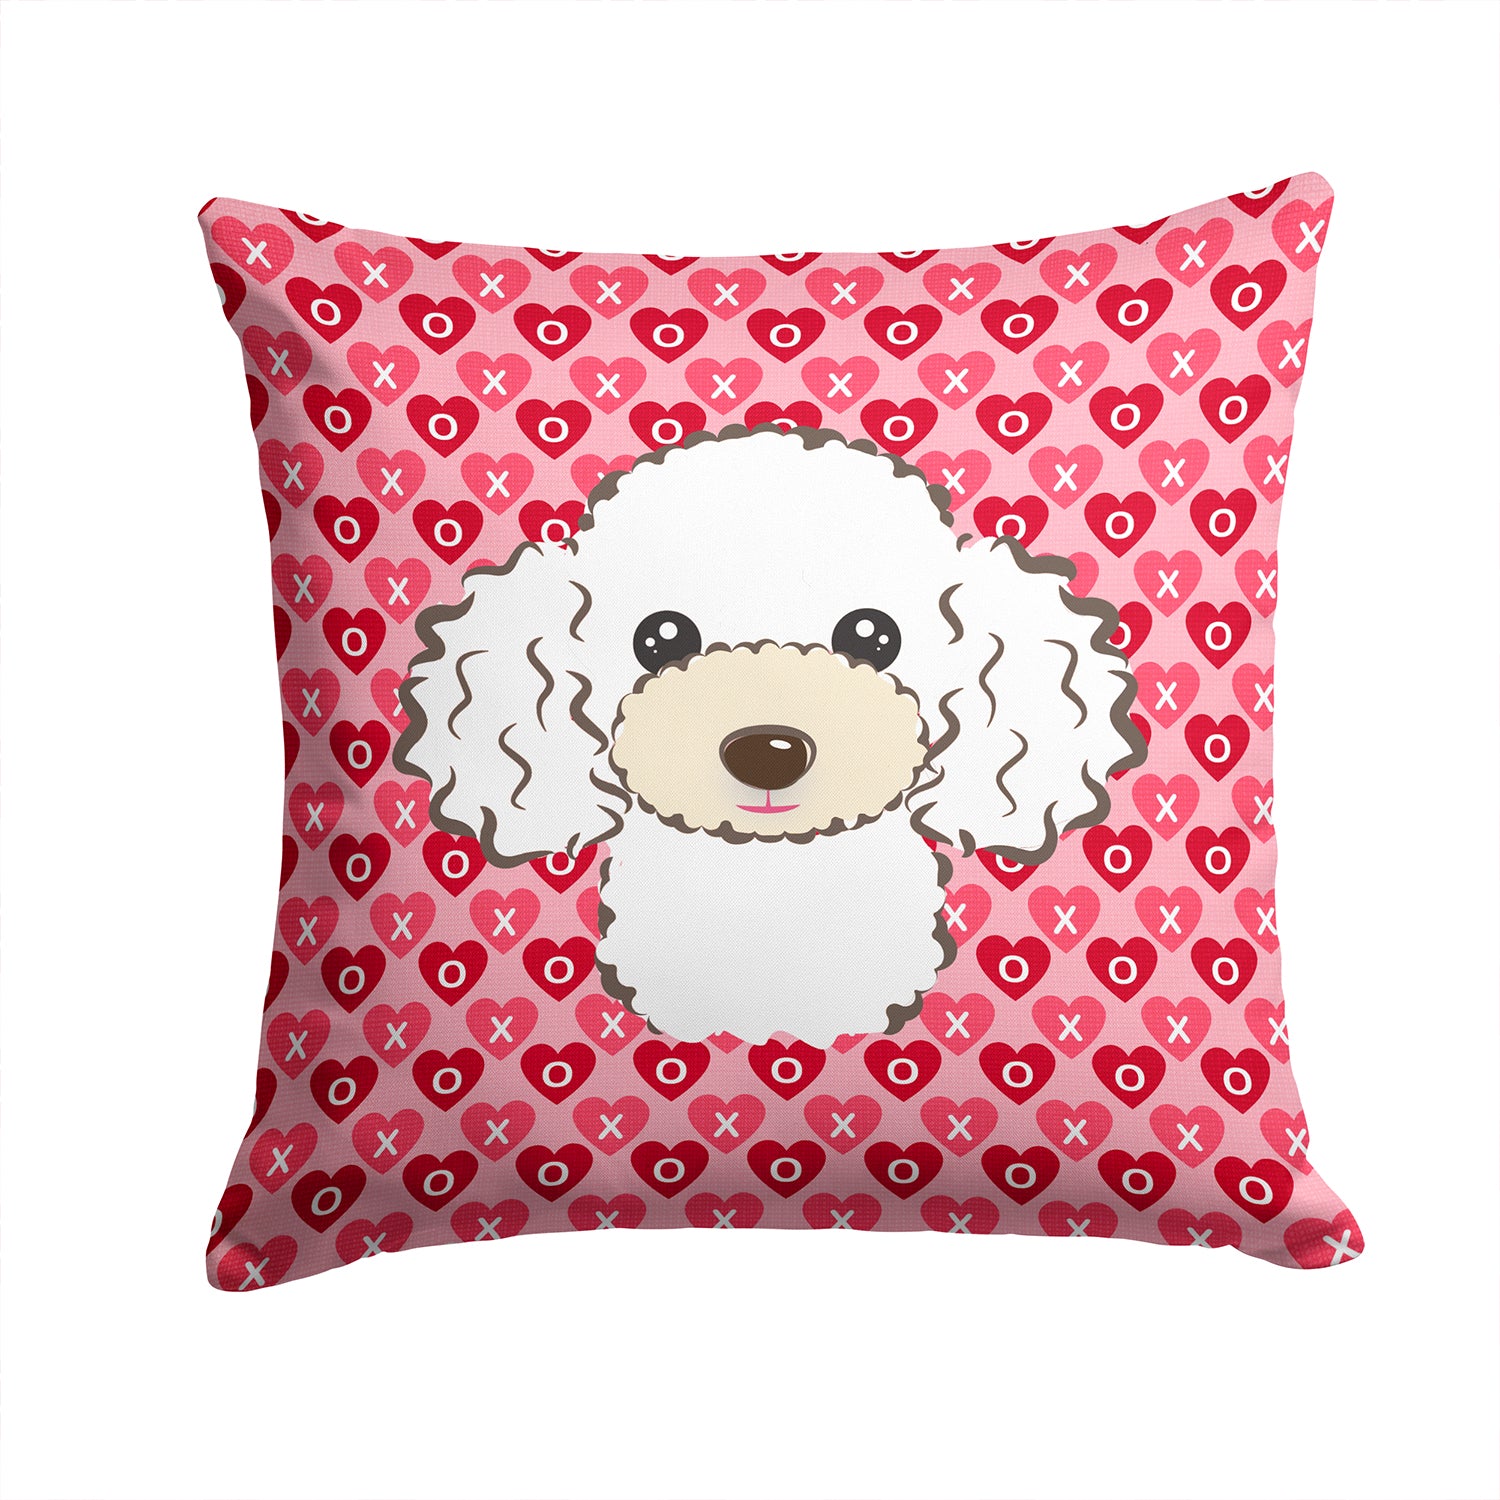 White Poodle Hearts Fabric Decorative Pillow BB5327PW1414 - the-store.com